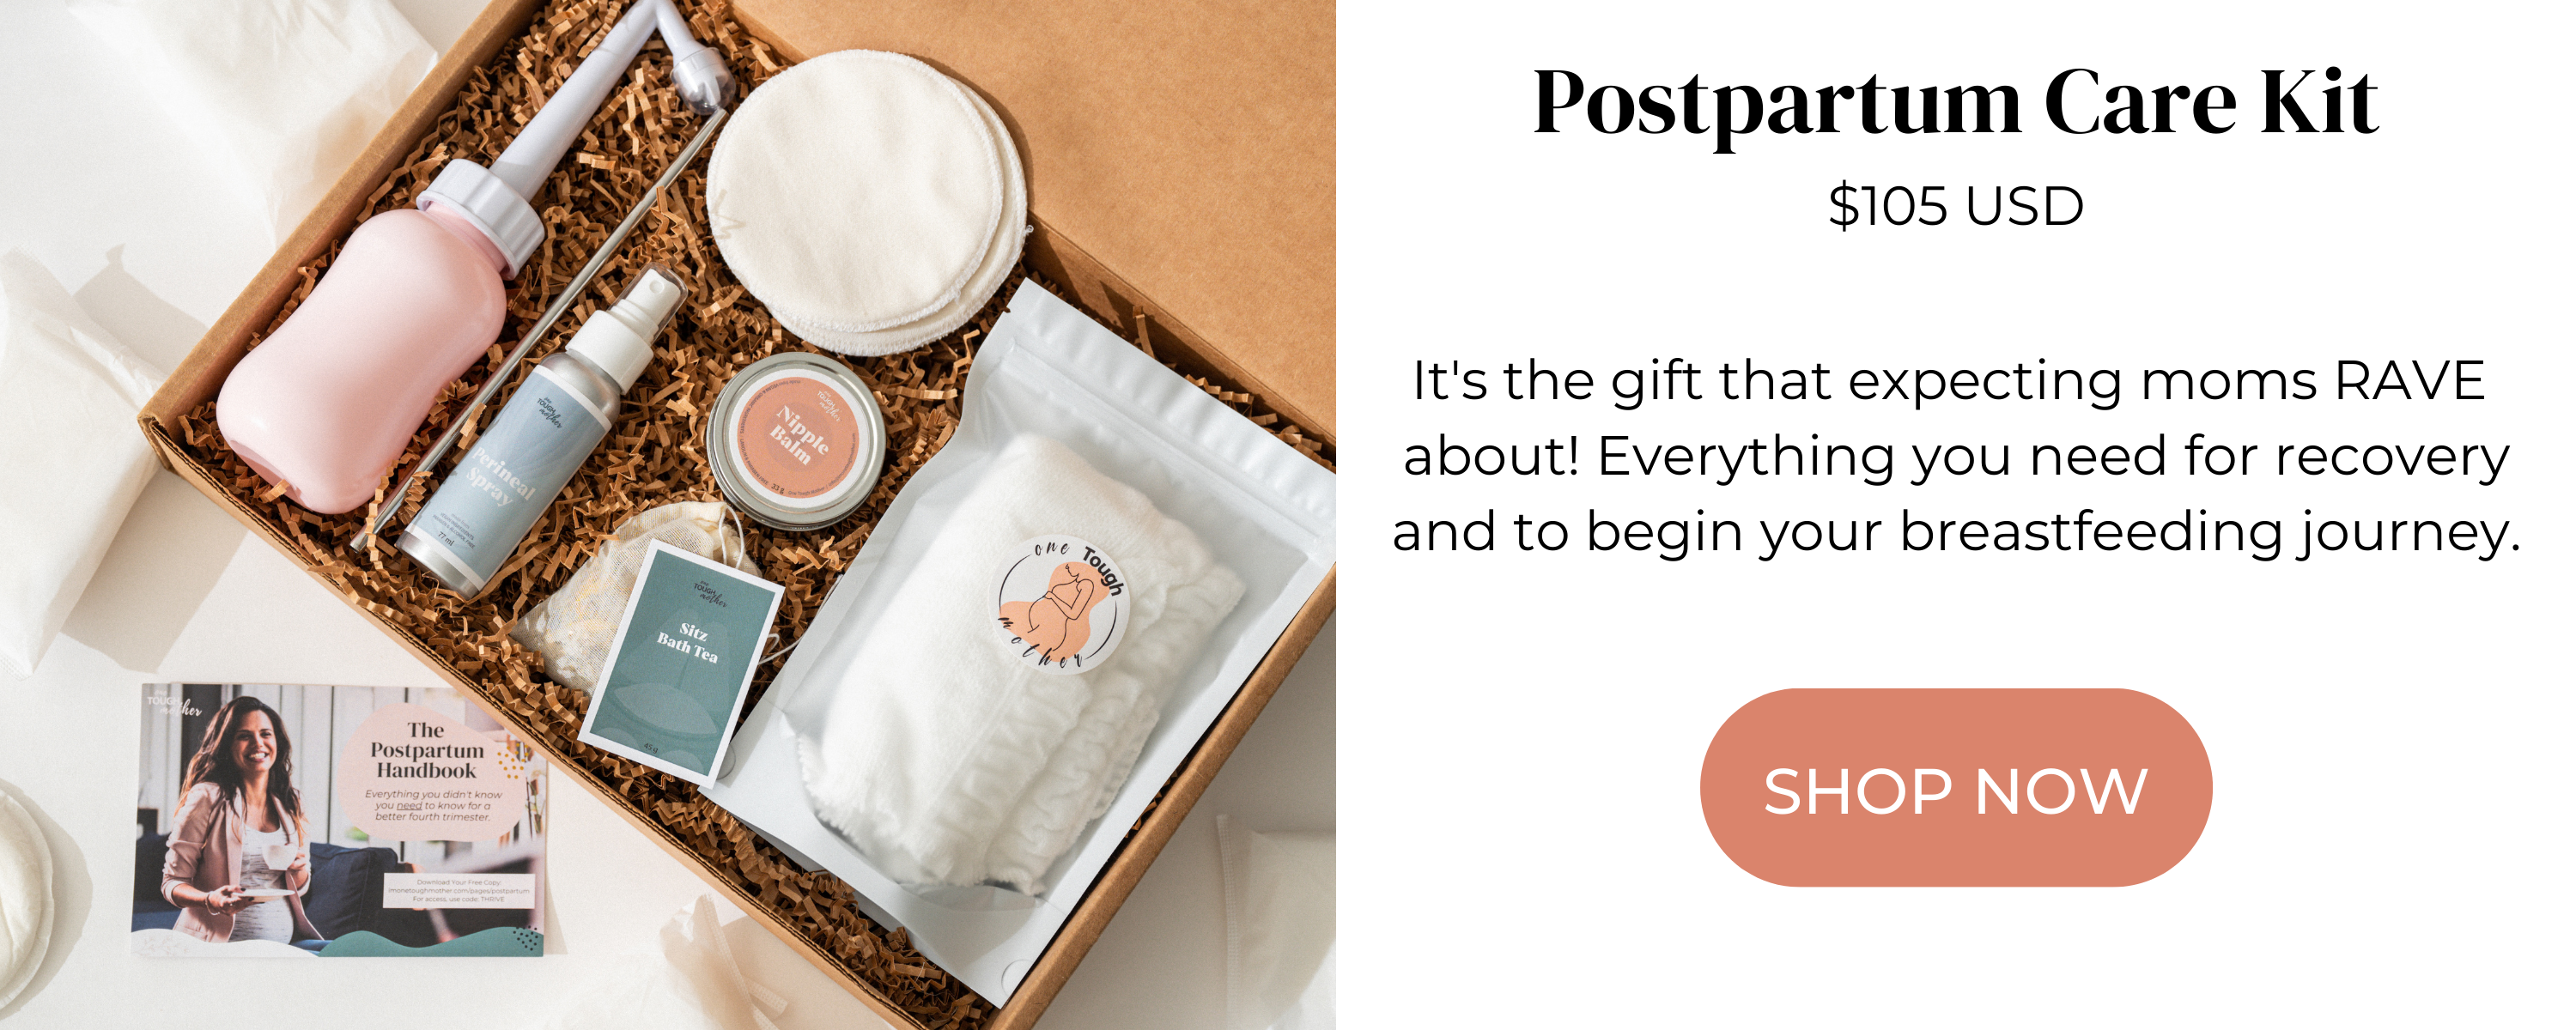 The Postpartum Care Kit is everything you need for a better postpartum recovery and breastfeeding journey